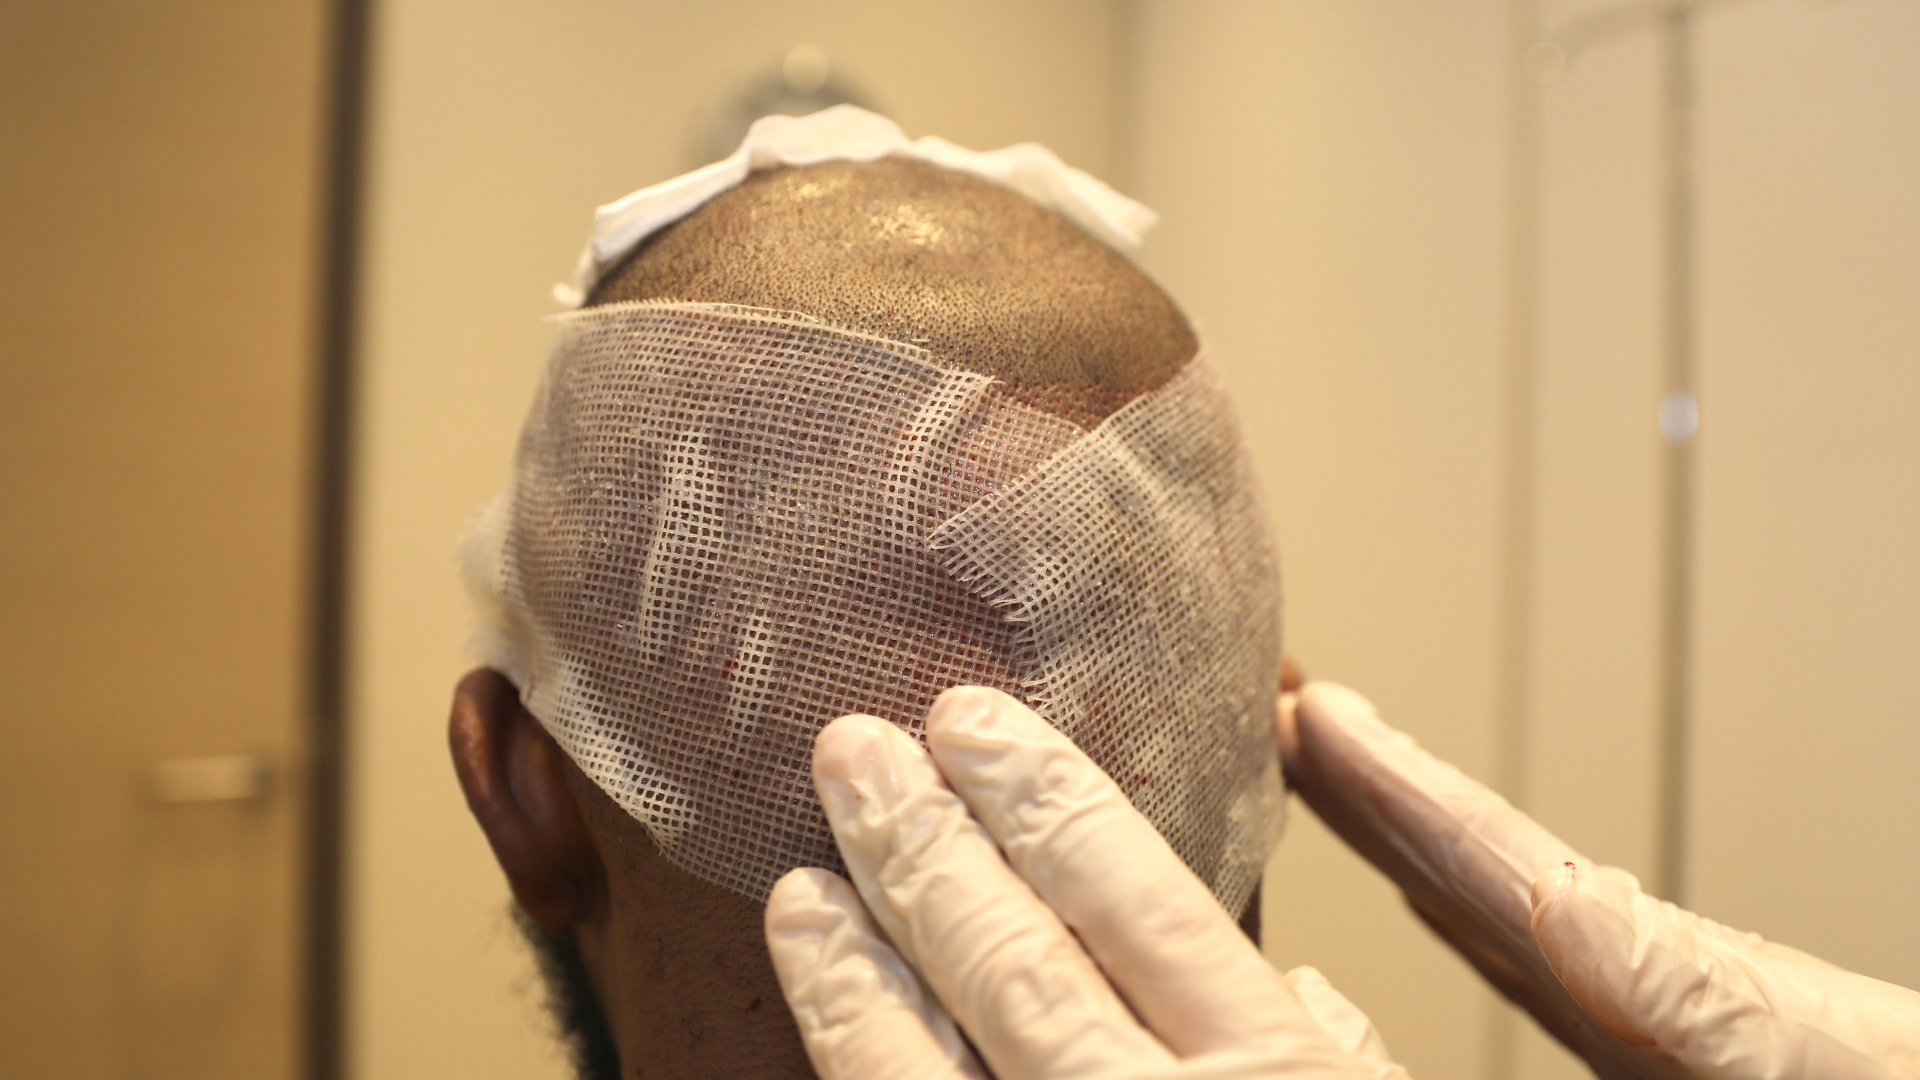 A hair transplant surgeon takes care of a patient's donor area